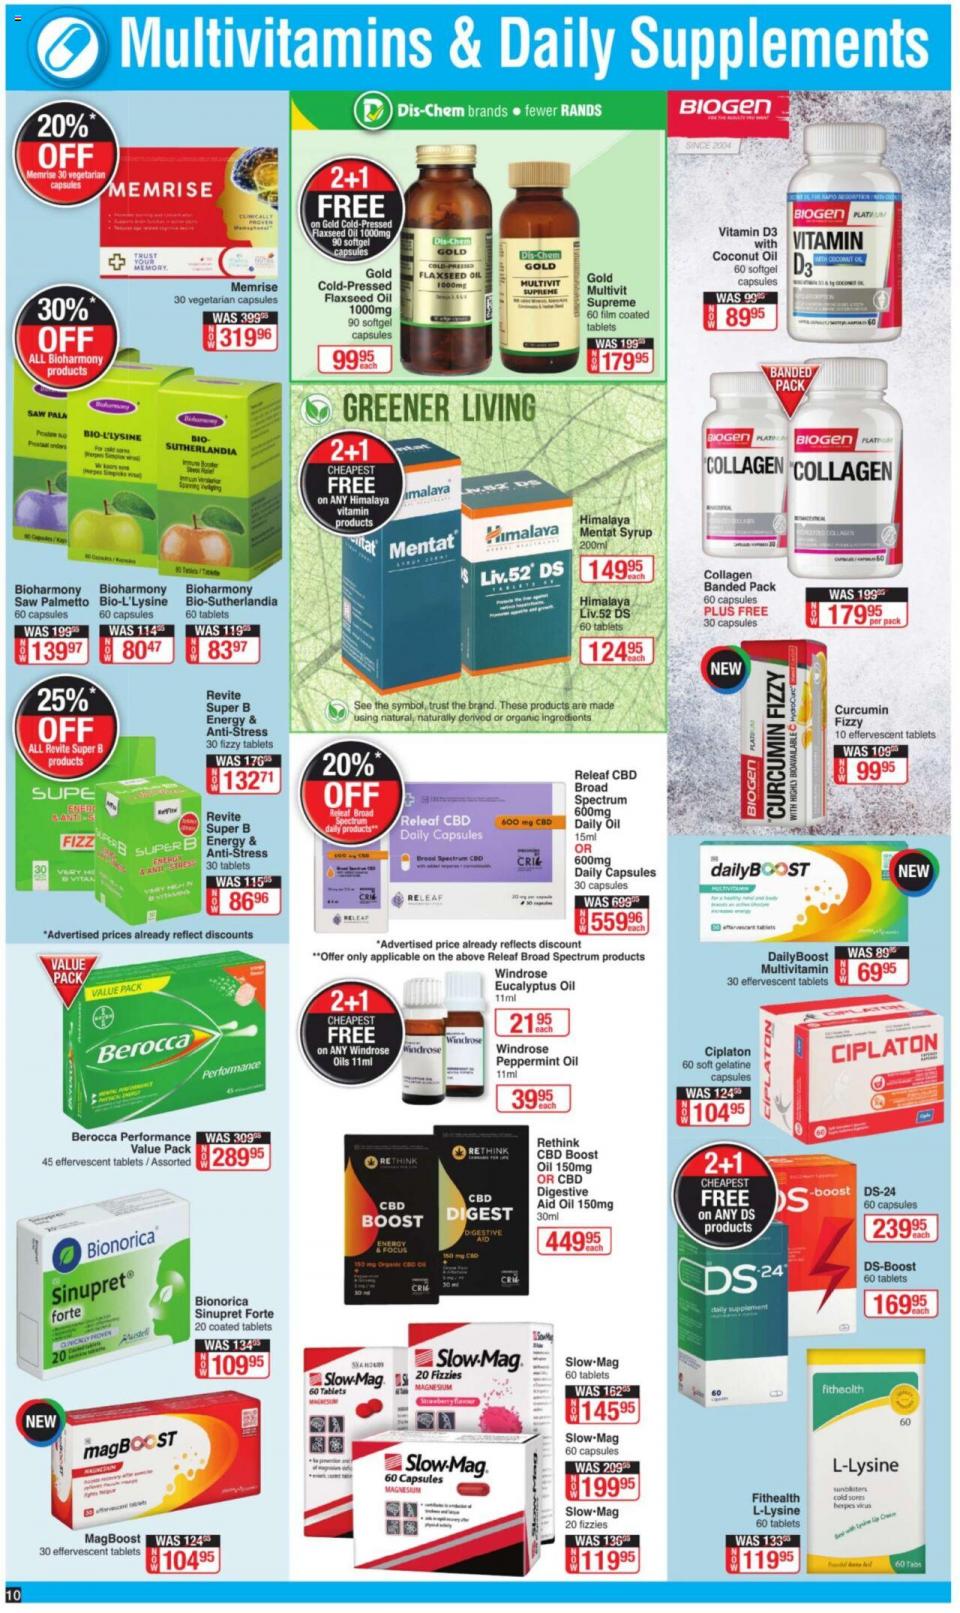 Does Dischem Stock Solgar Products